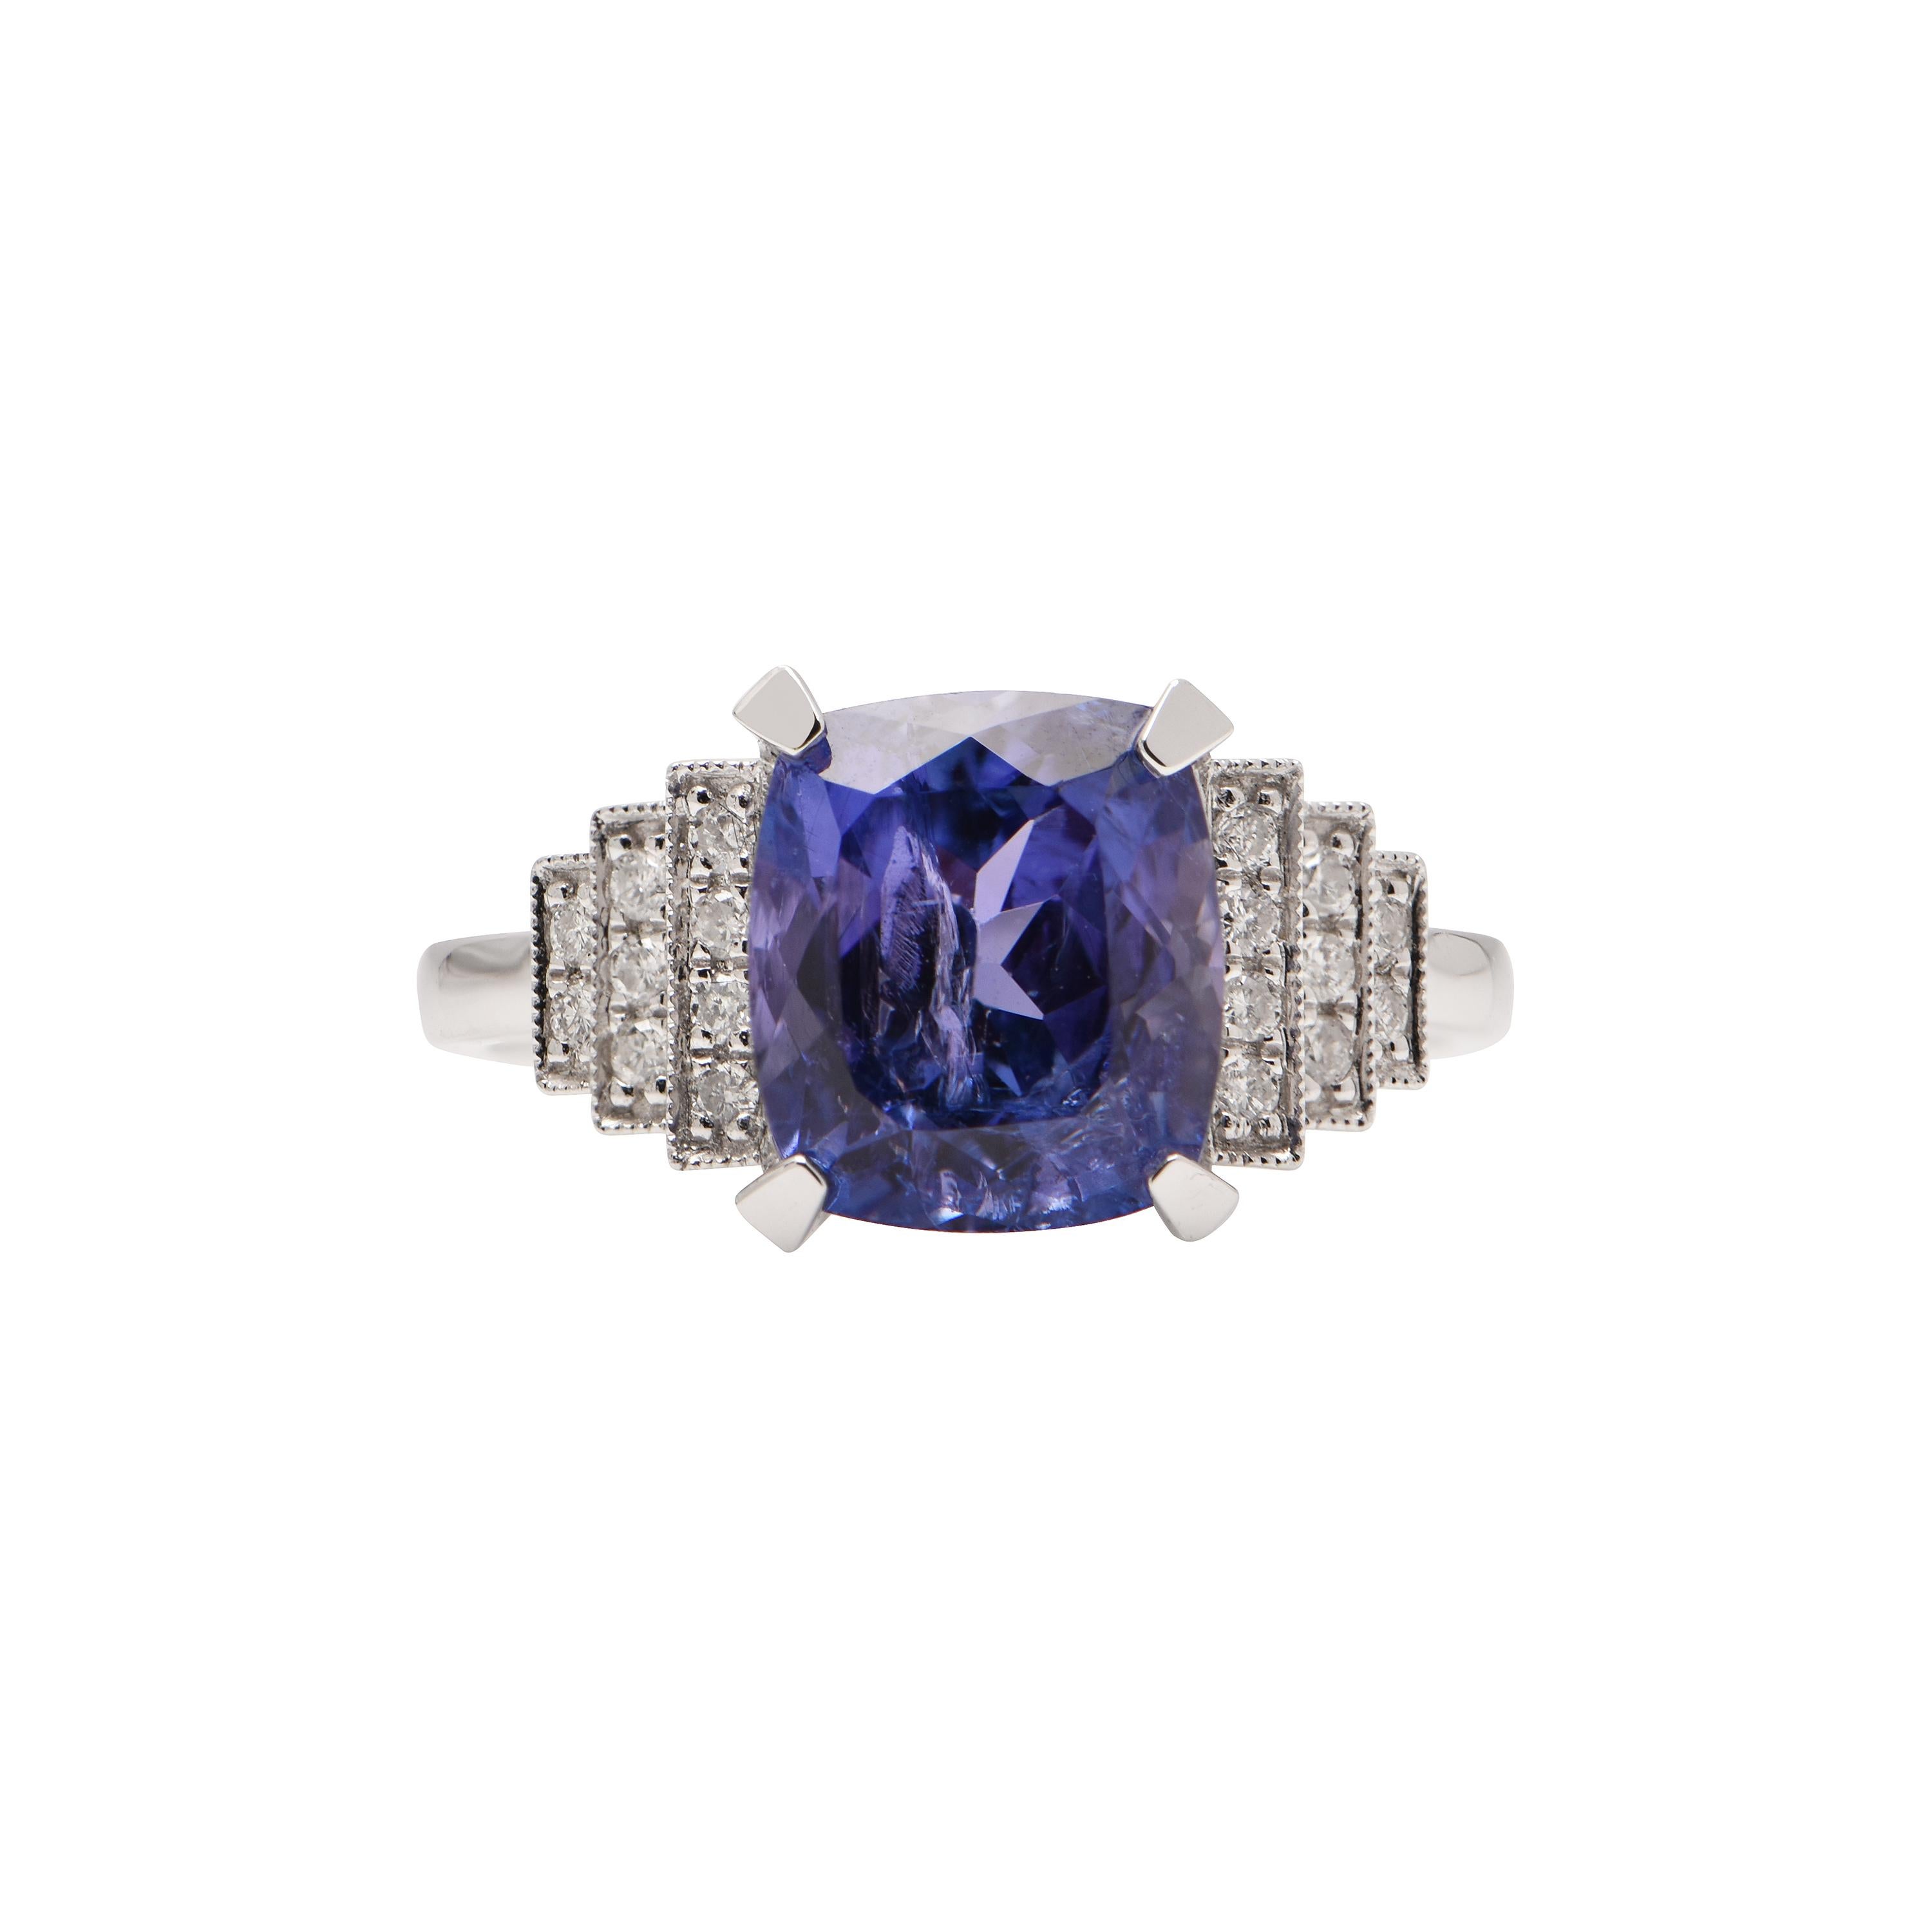 An 18ct White Gold ring showcasing a Tanzanite (3.53ct), and 18 Diamonds totalling 0.15ct. Size M.
